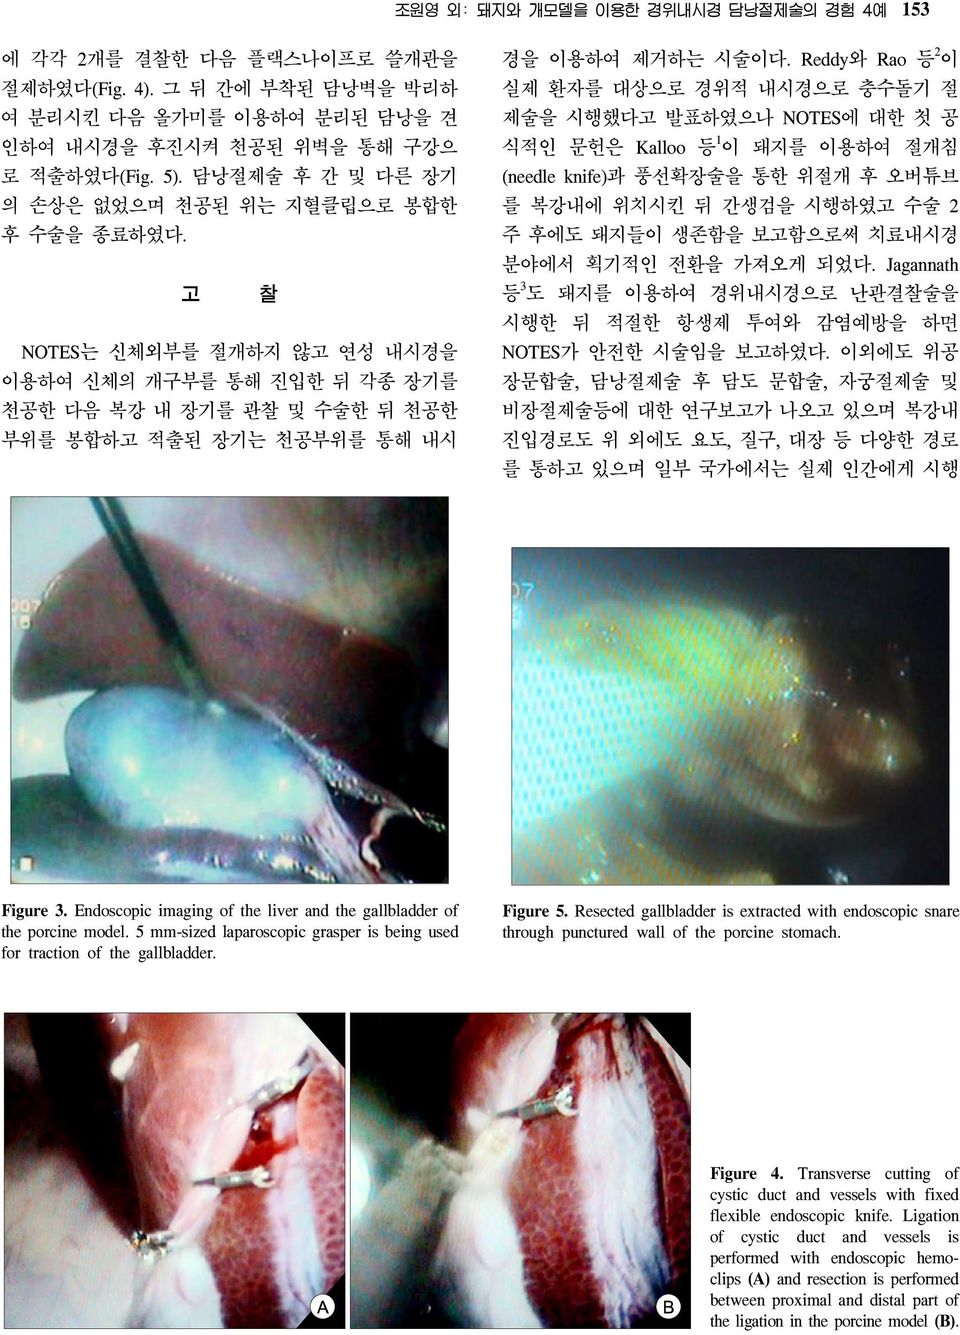 Endoscopic imaging of the liver and the gallbladder of the porcine model. 5 mm-sized laparoscopic grasper is being used for traction of the gallbladder. 153 2 경을 이용하여 제거하는 시술이다.